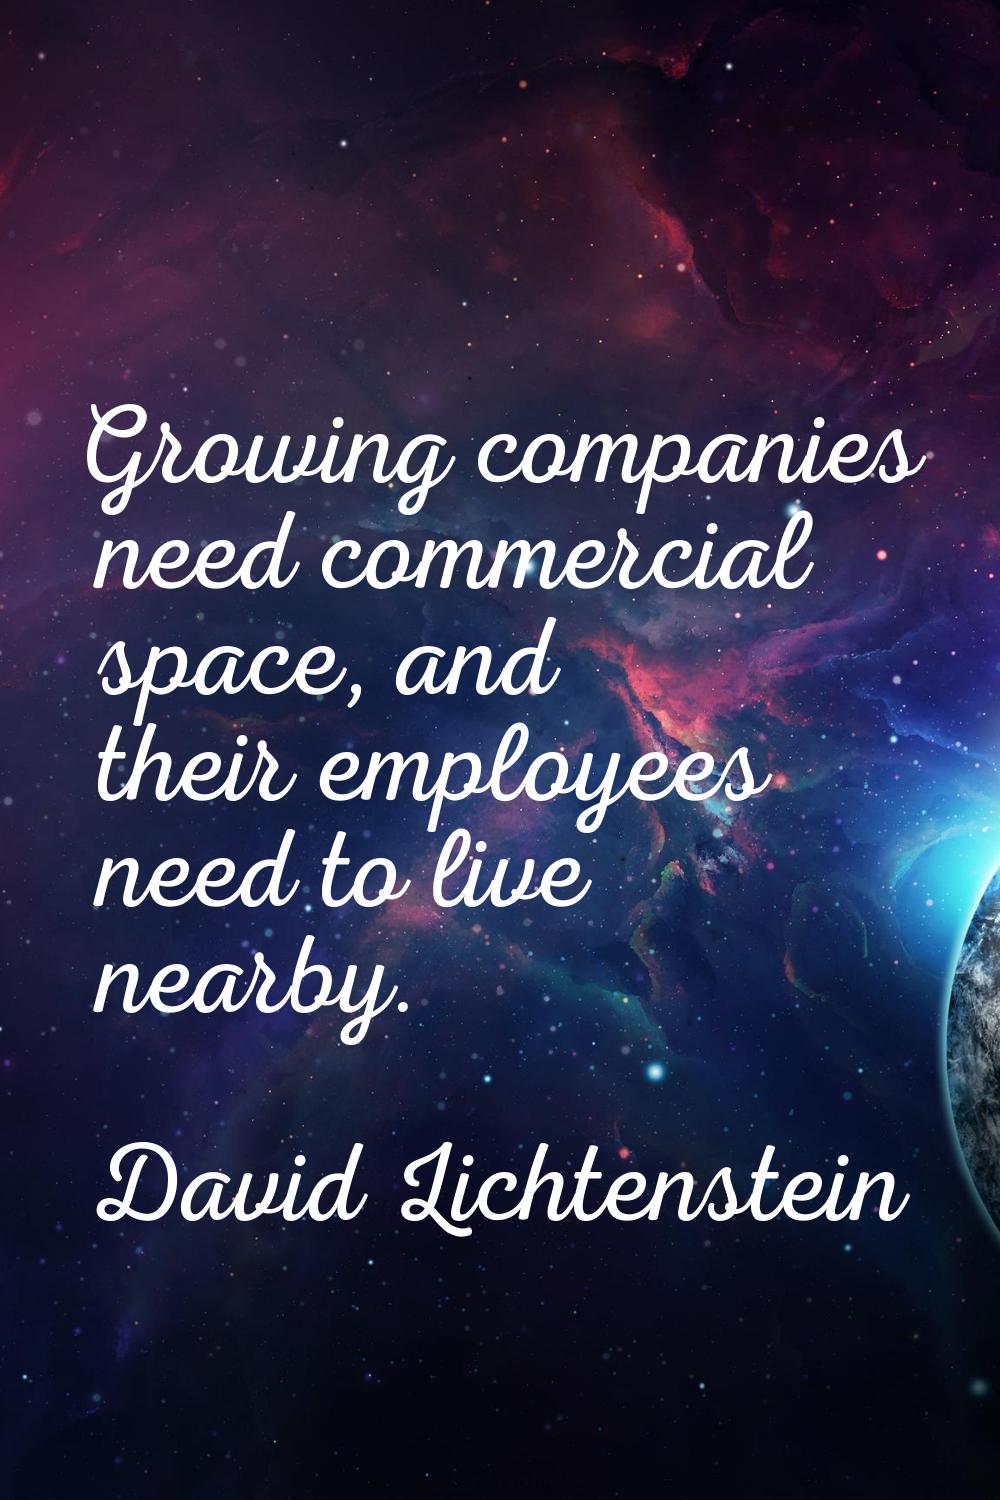 Growing companies need commercial space, and their employees need to live nearby.